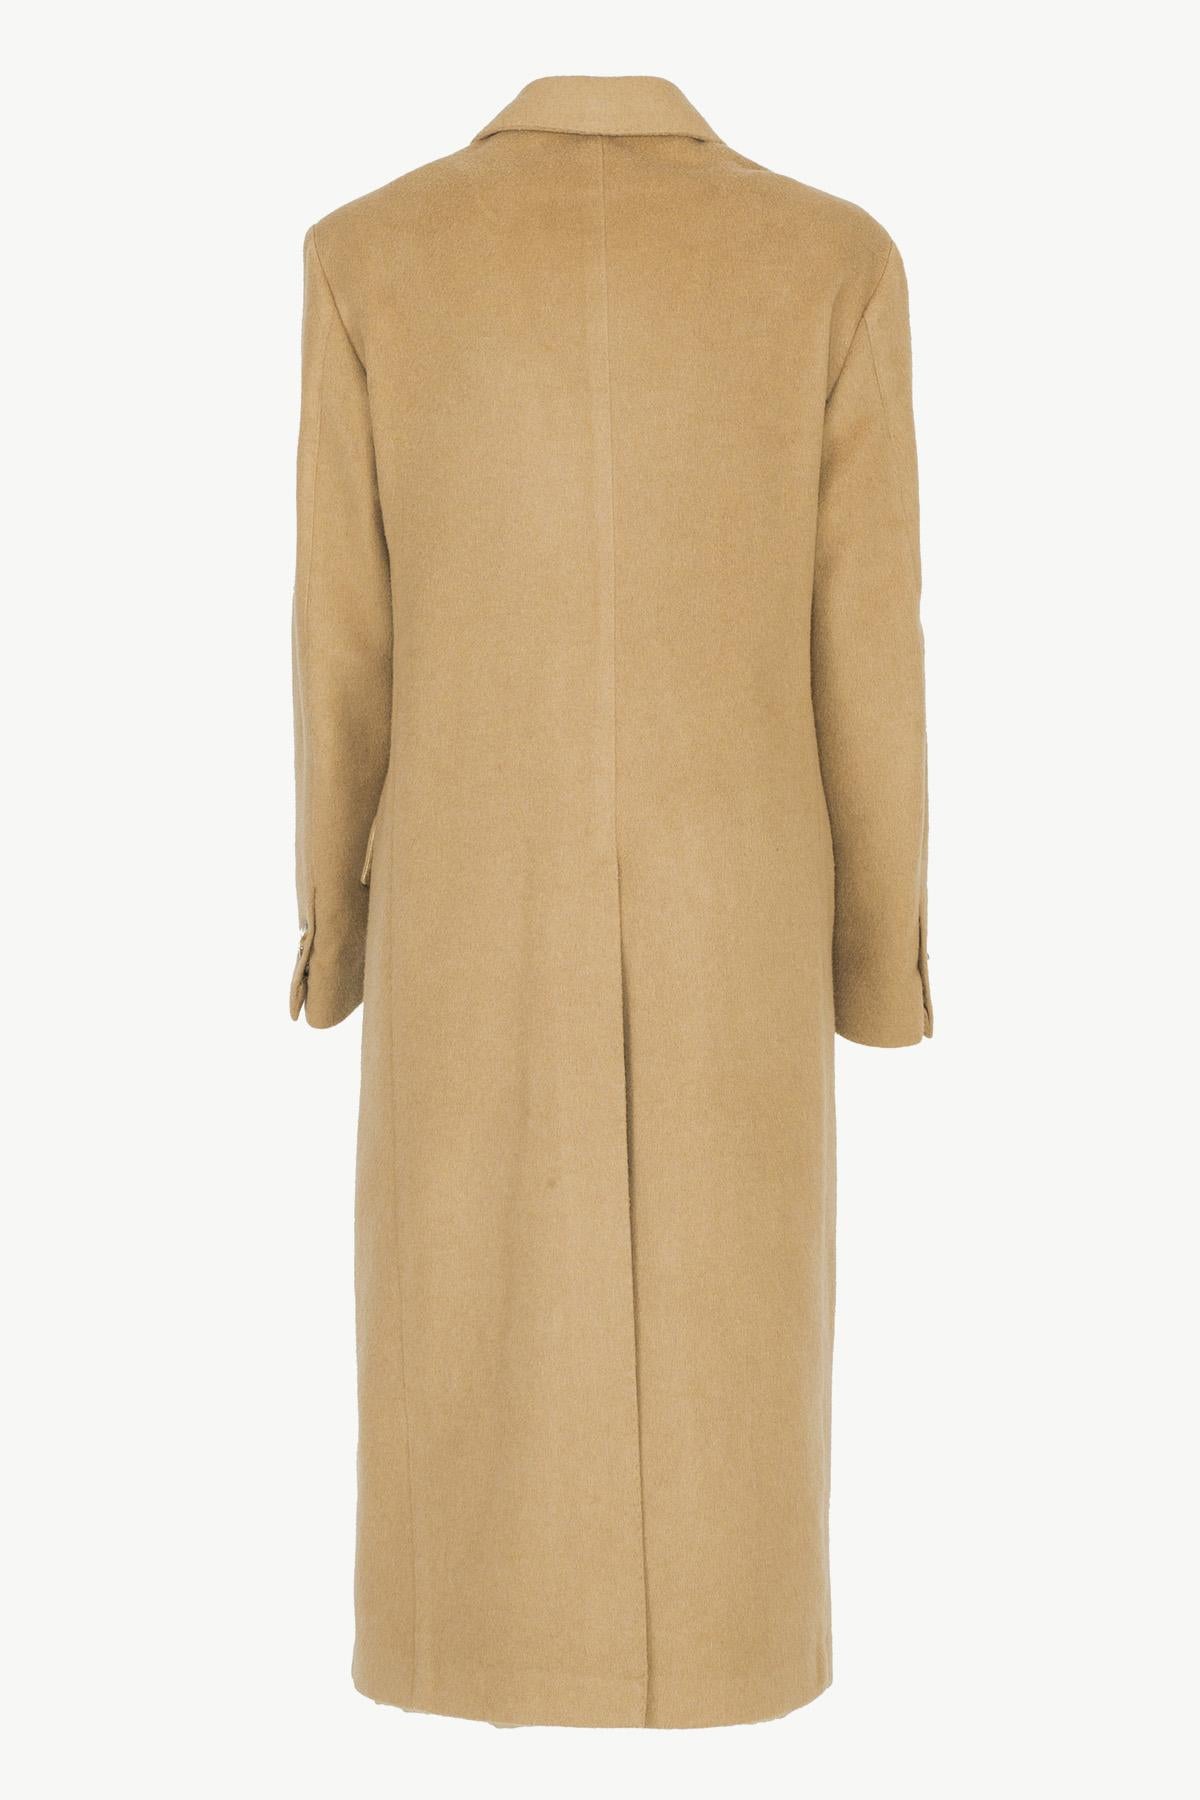 Giuliva Heritage Camel Wool & Cashmere Cindy Coat

-Tailored double breasted coat in a luxurious wool and cashmere blend
-Amazing soft texture 
-Neutral camel hue 
-Classic elegant cut 
-Button fastening to the front 
-3 pockets to the front 
-2